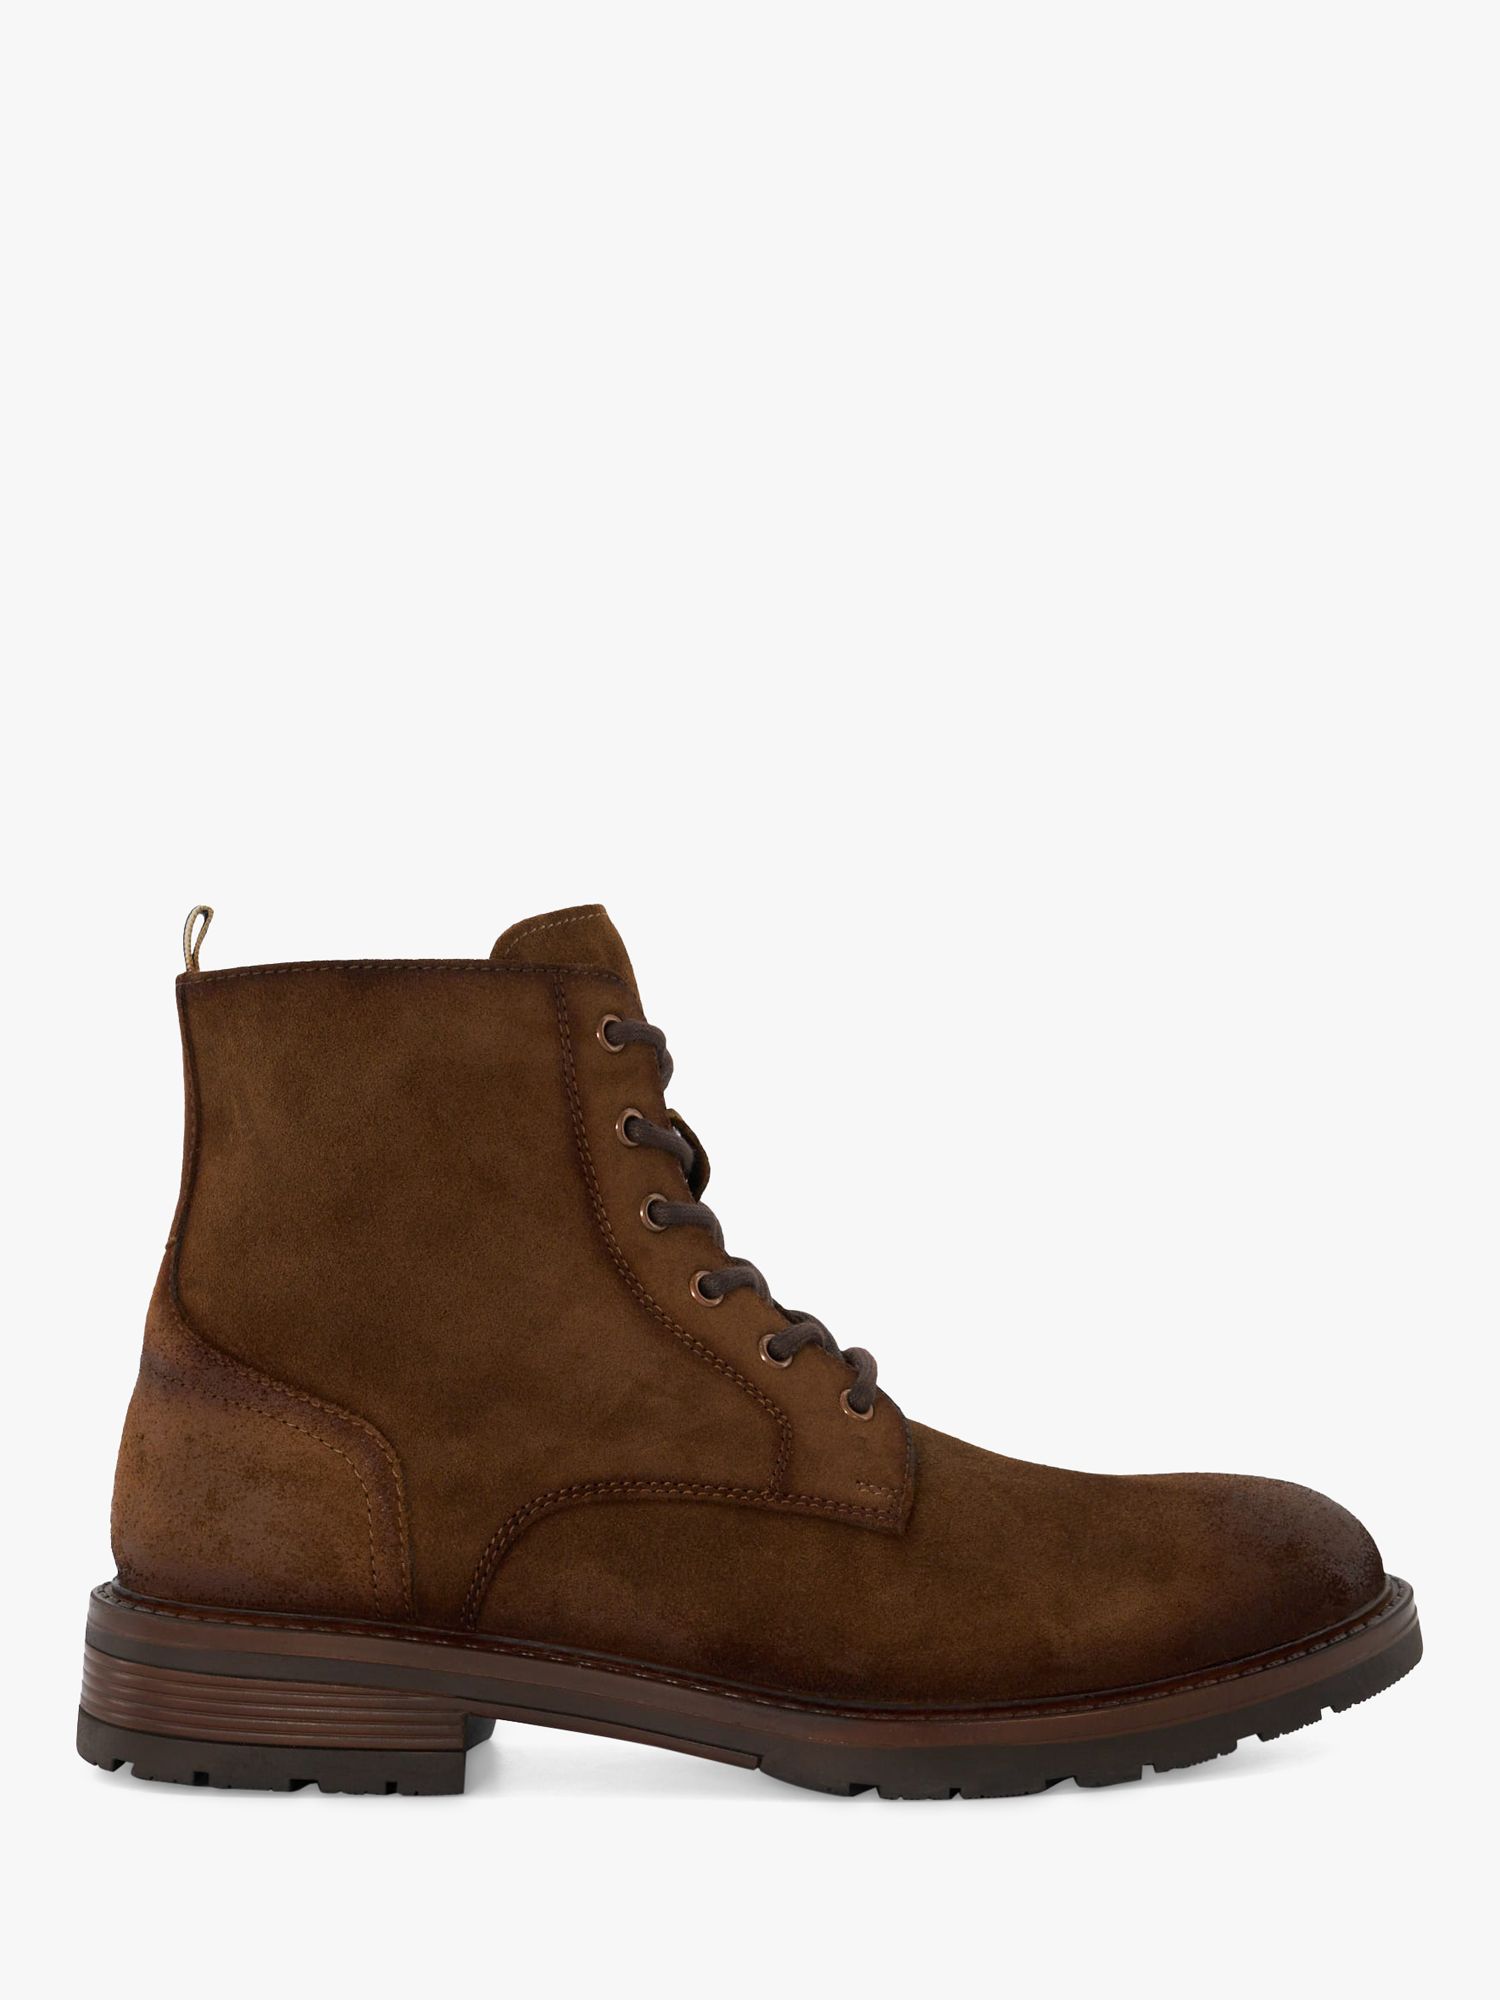 Dune Cheshires Suede Boots, Tan at John Lewis & Partners